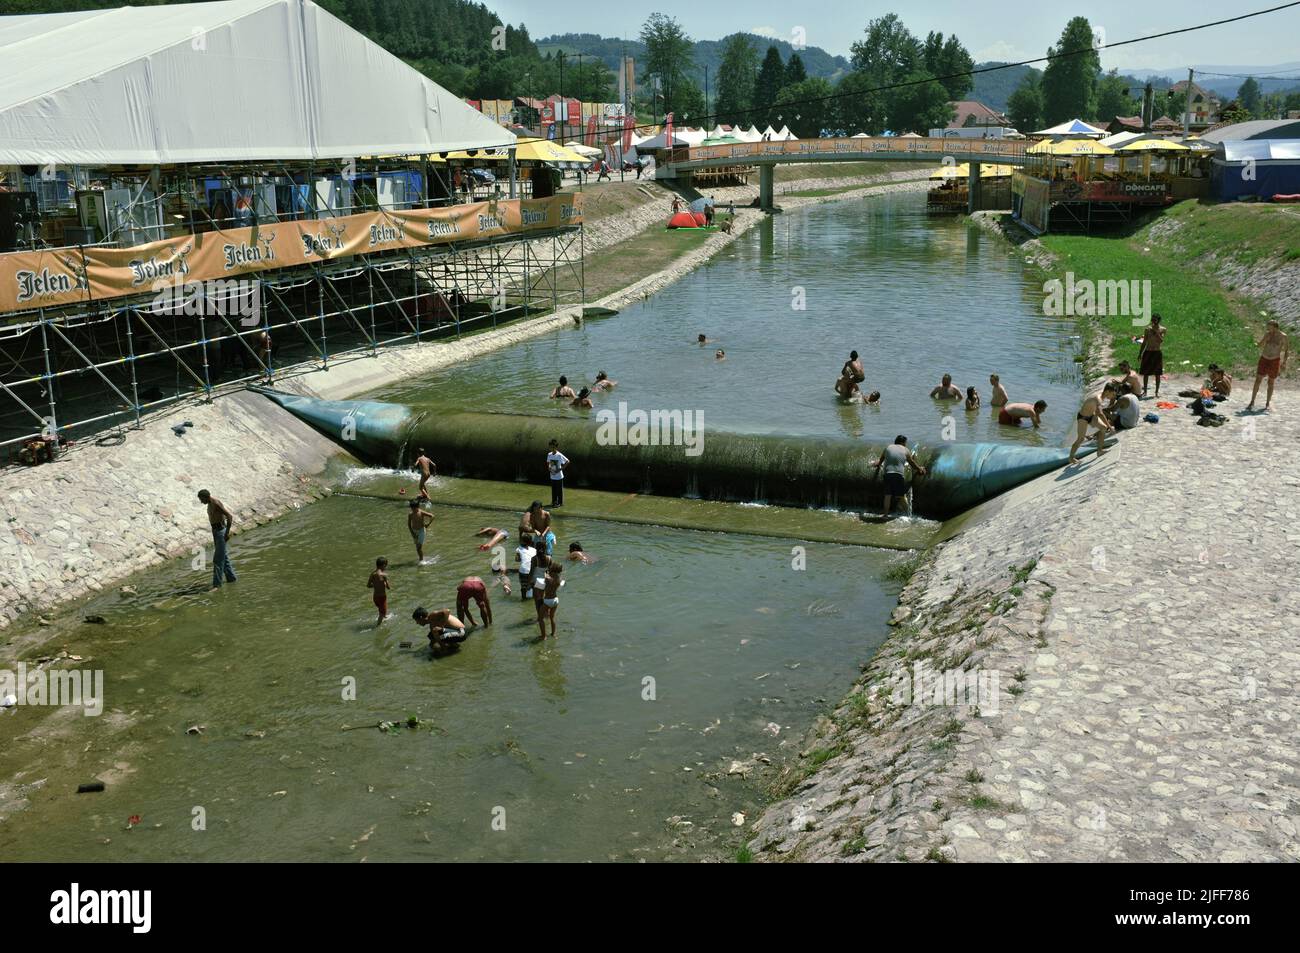 gypsy community cooling off and catching small fish by the hands in the shallow waters of the Bjelica river in Guca, Serbia Stock Photo